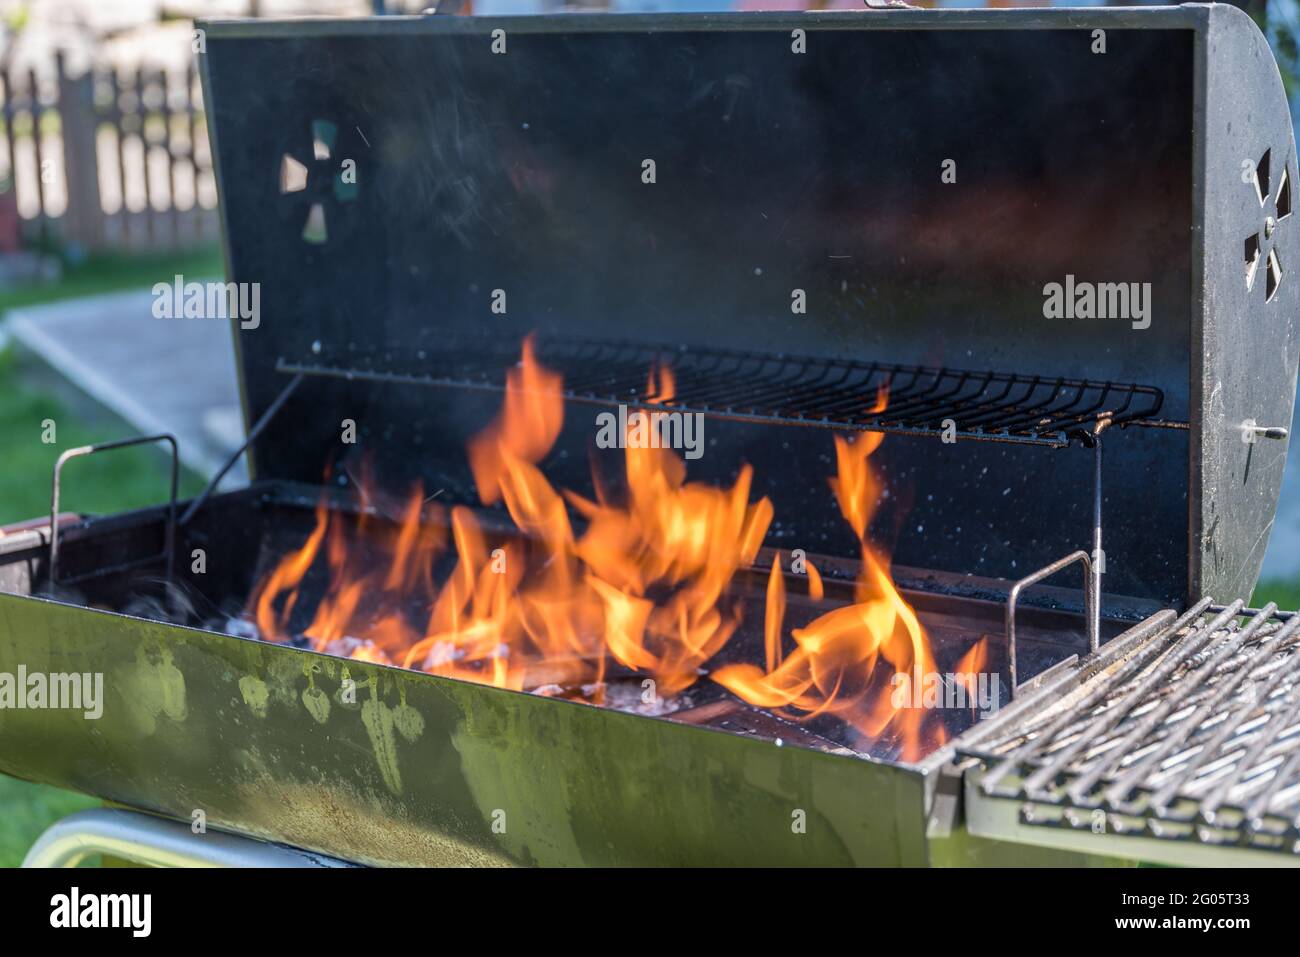 Holz Und Kohle Im Charcoal Grill - Grill Fire Und Flamme Stockfoto